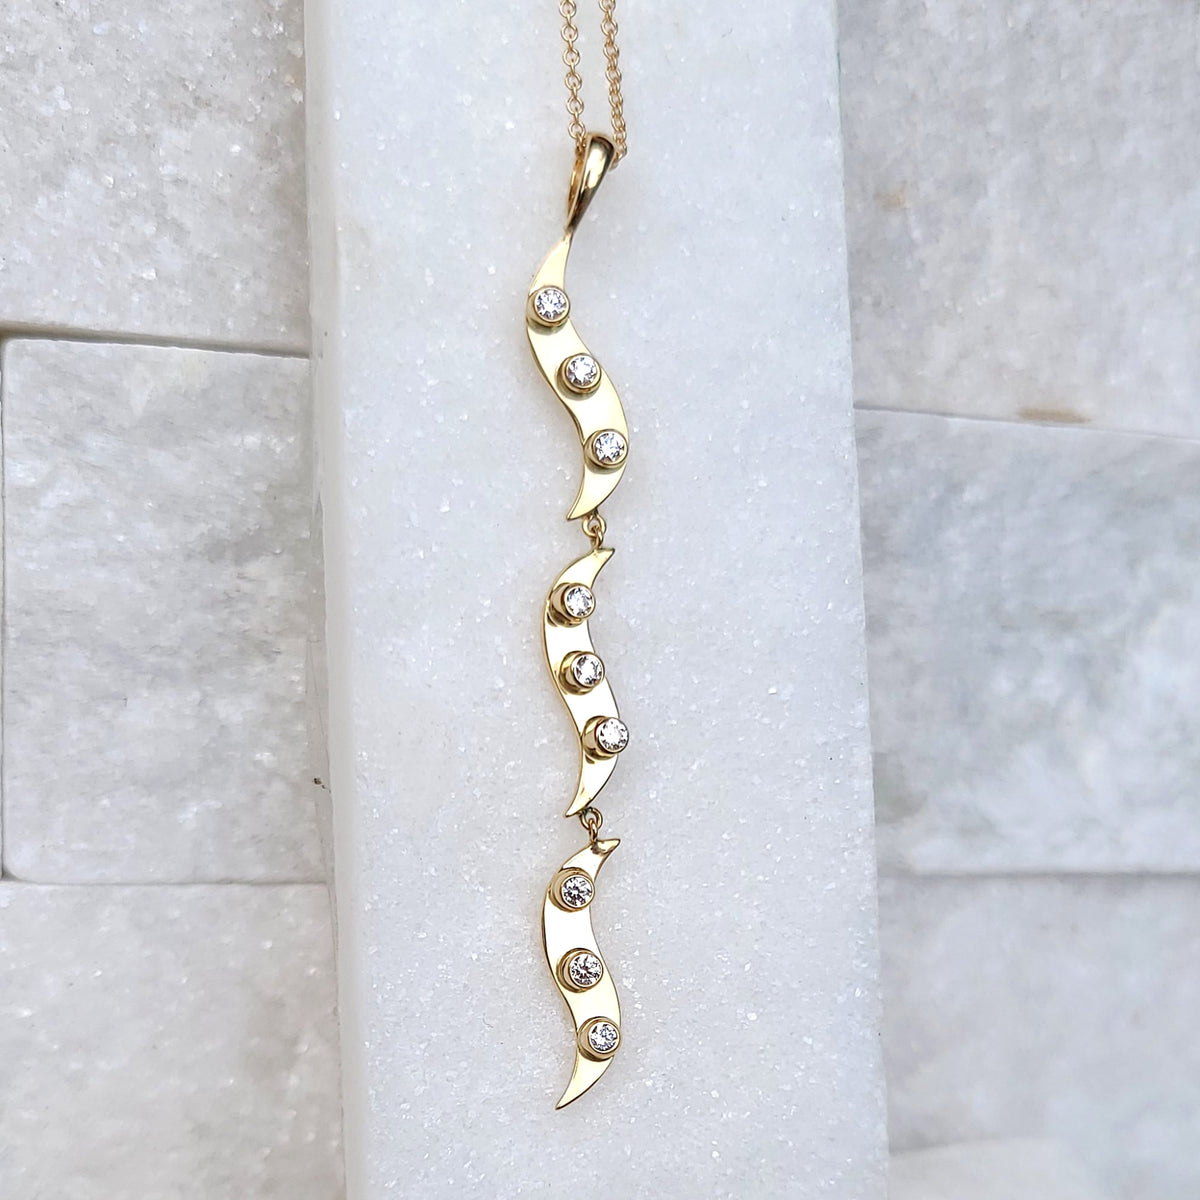 Sincerely Ginger Jewelry 14K Elegant Yellow Gold Triple Diamond Wave Necklace